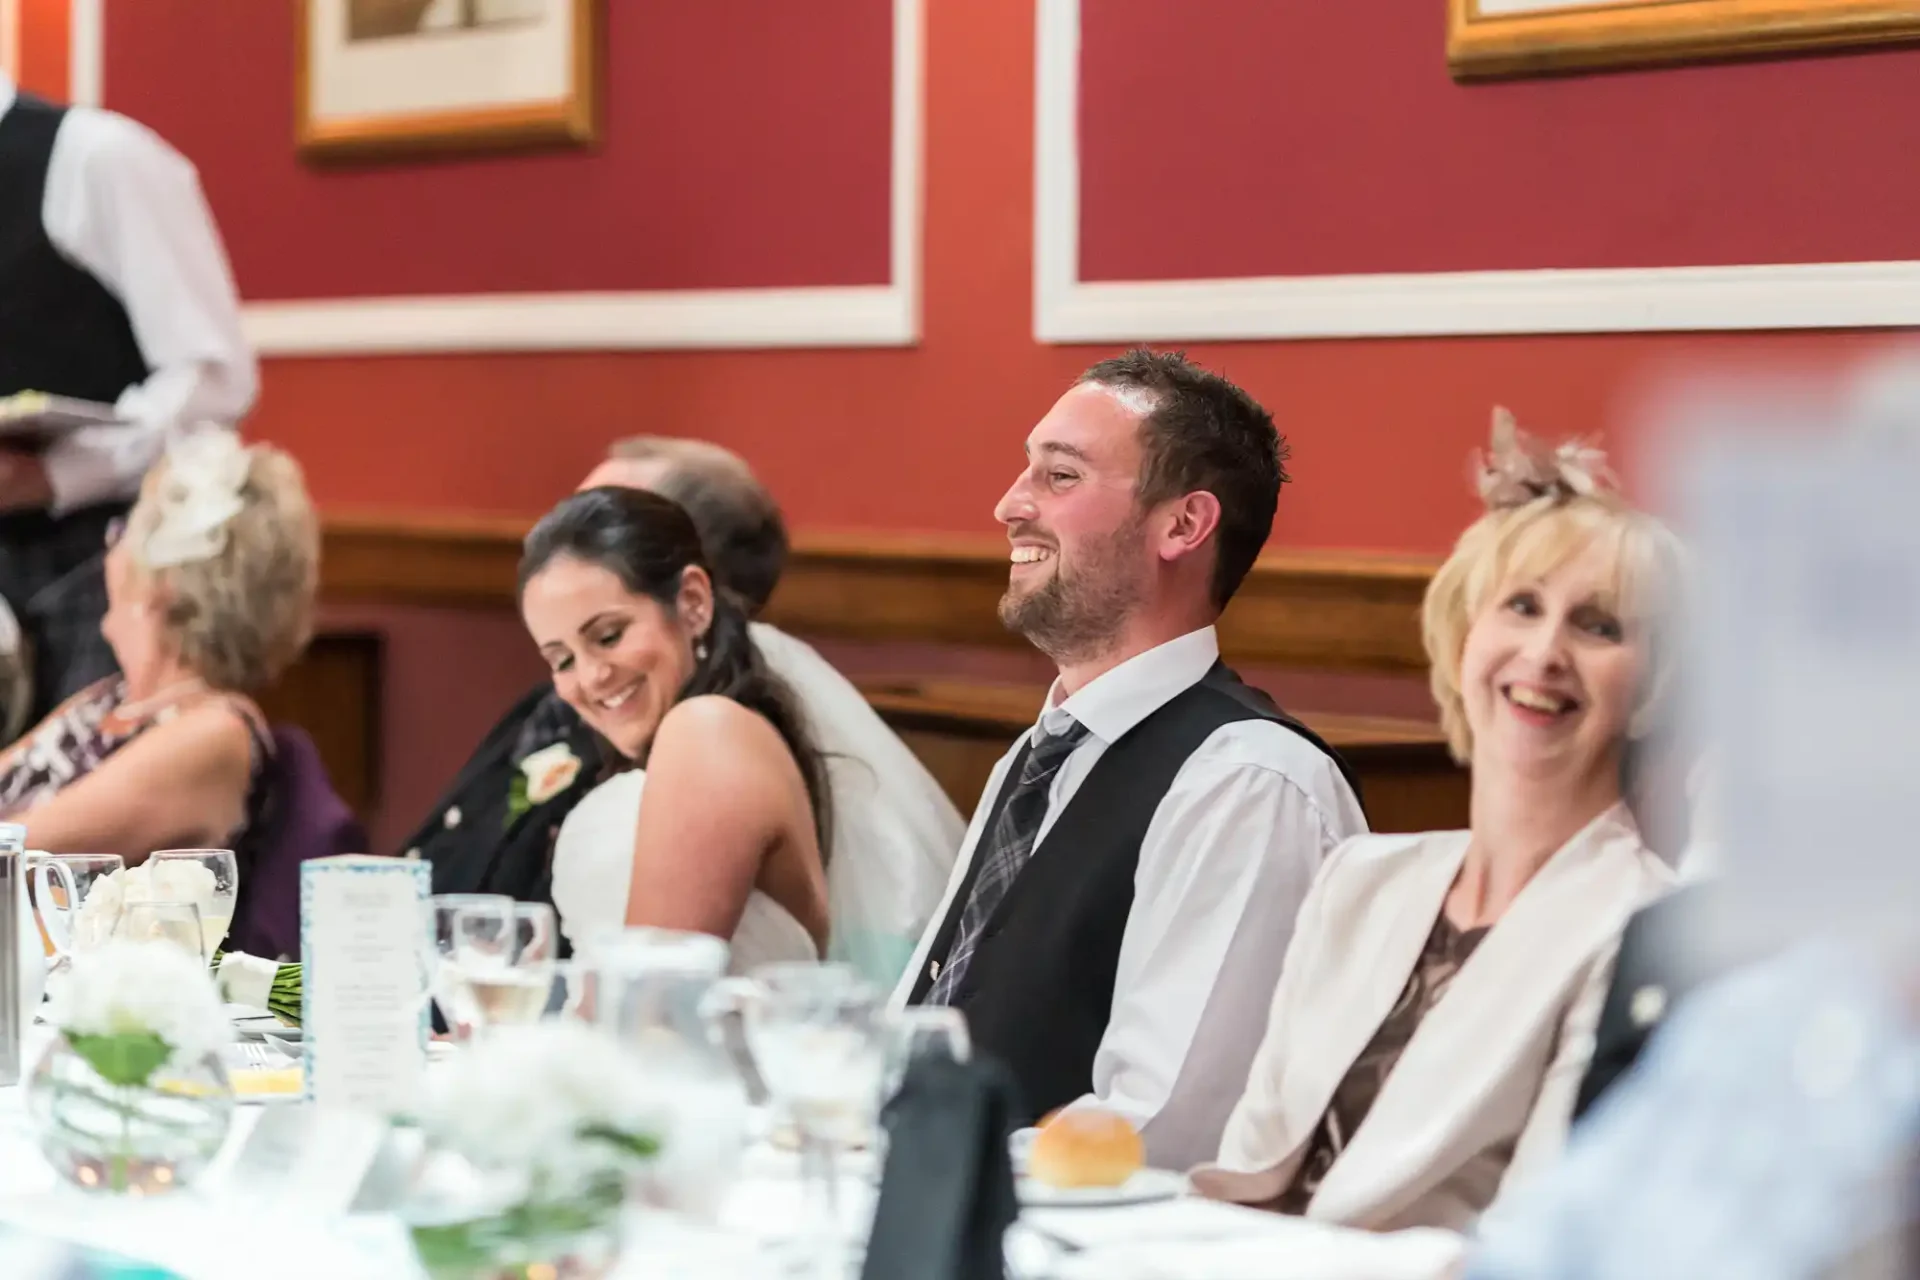 A group of guests at a formal event, smiling and enjoying a conversation at a dinner table.